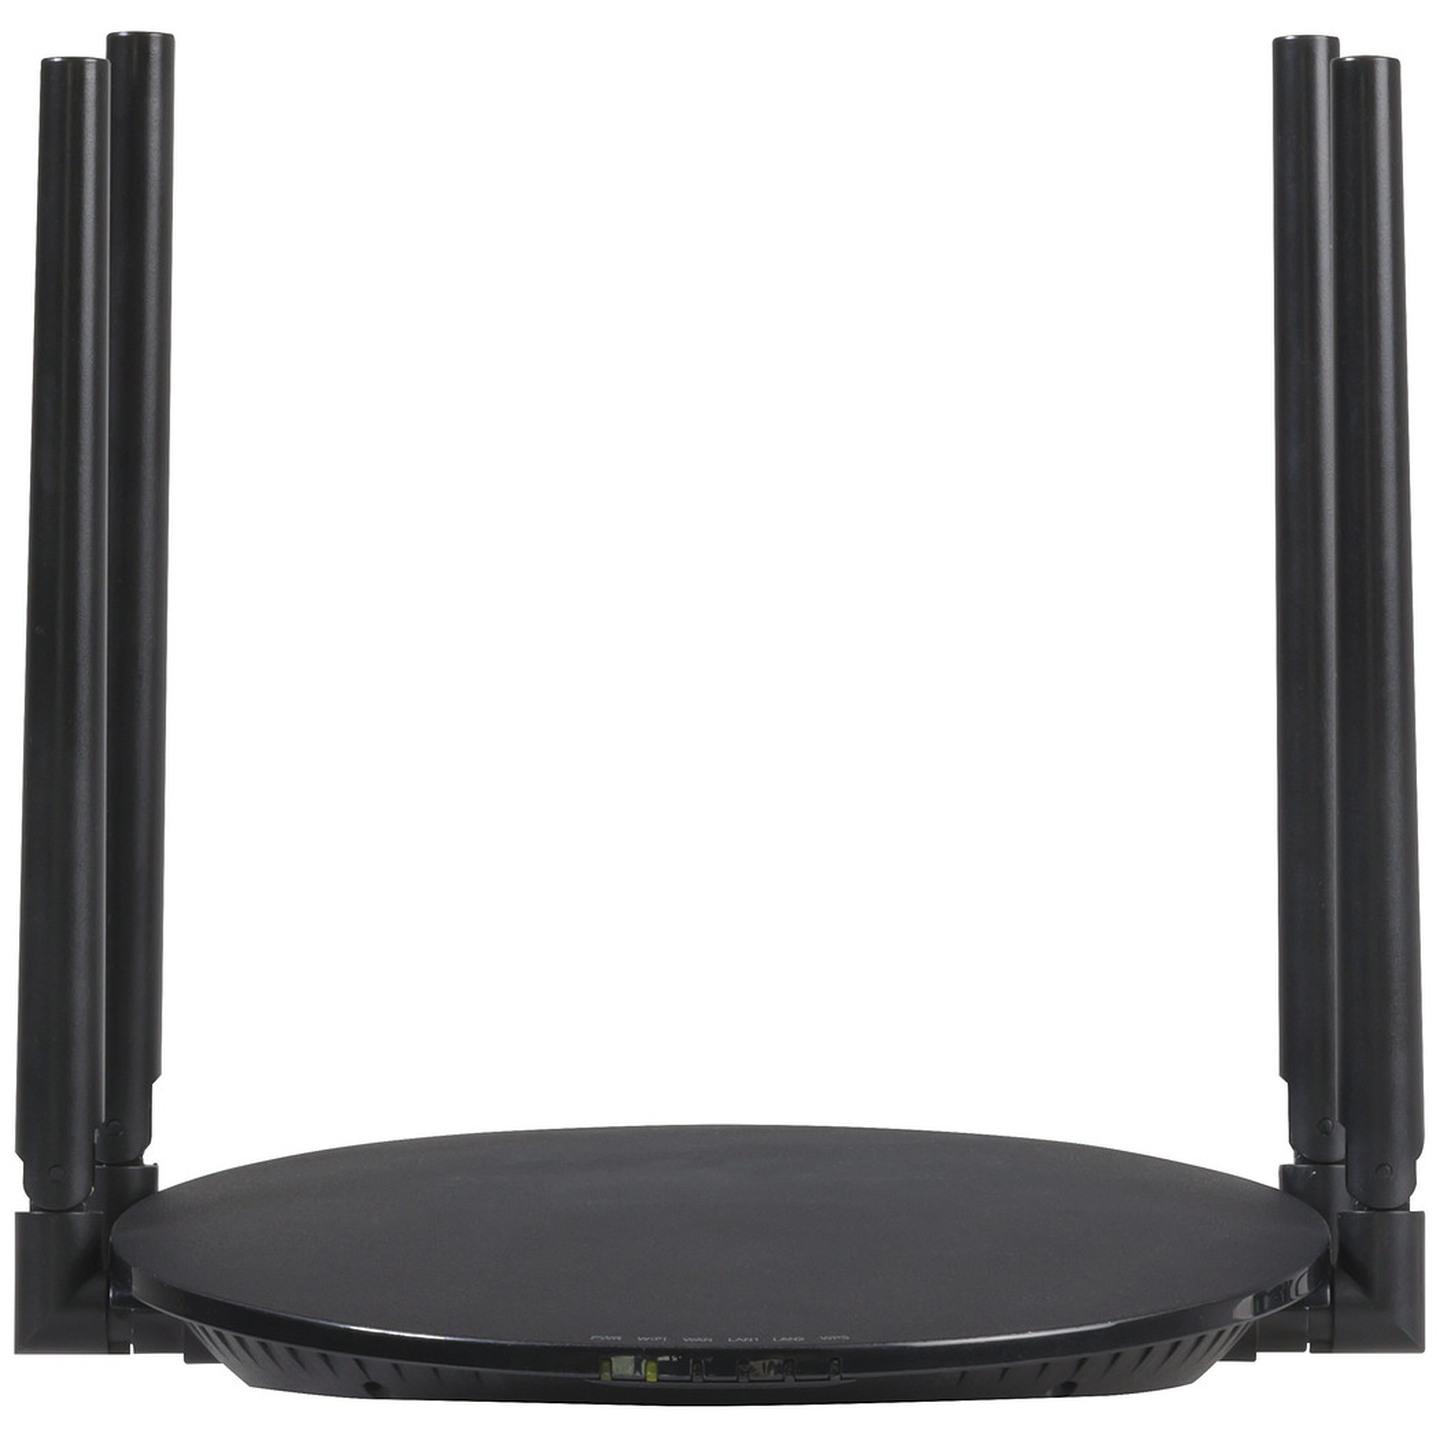 AC1200 Smart Wi-Fi Router